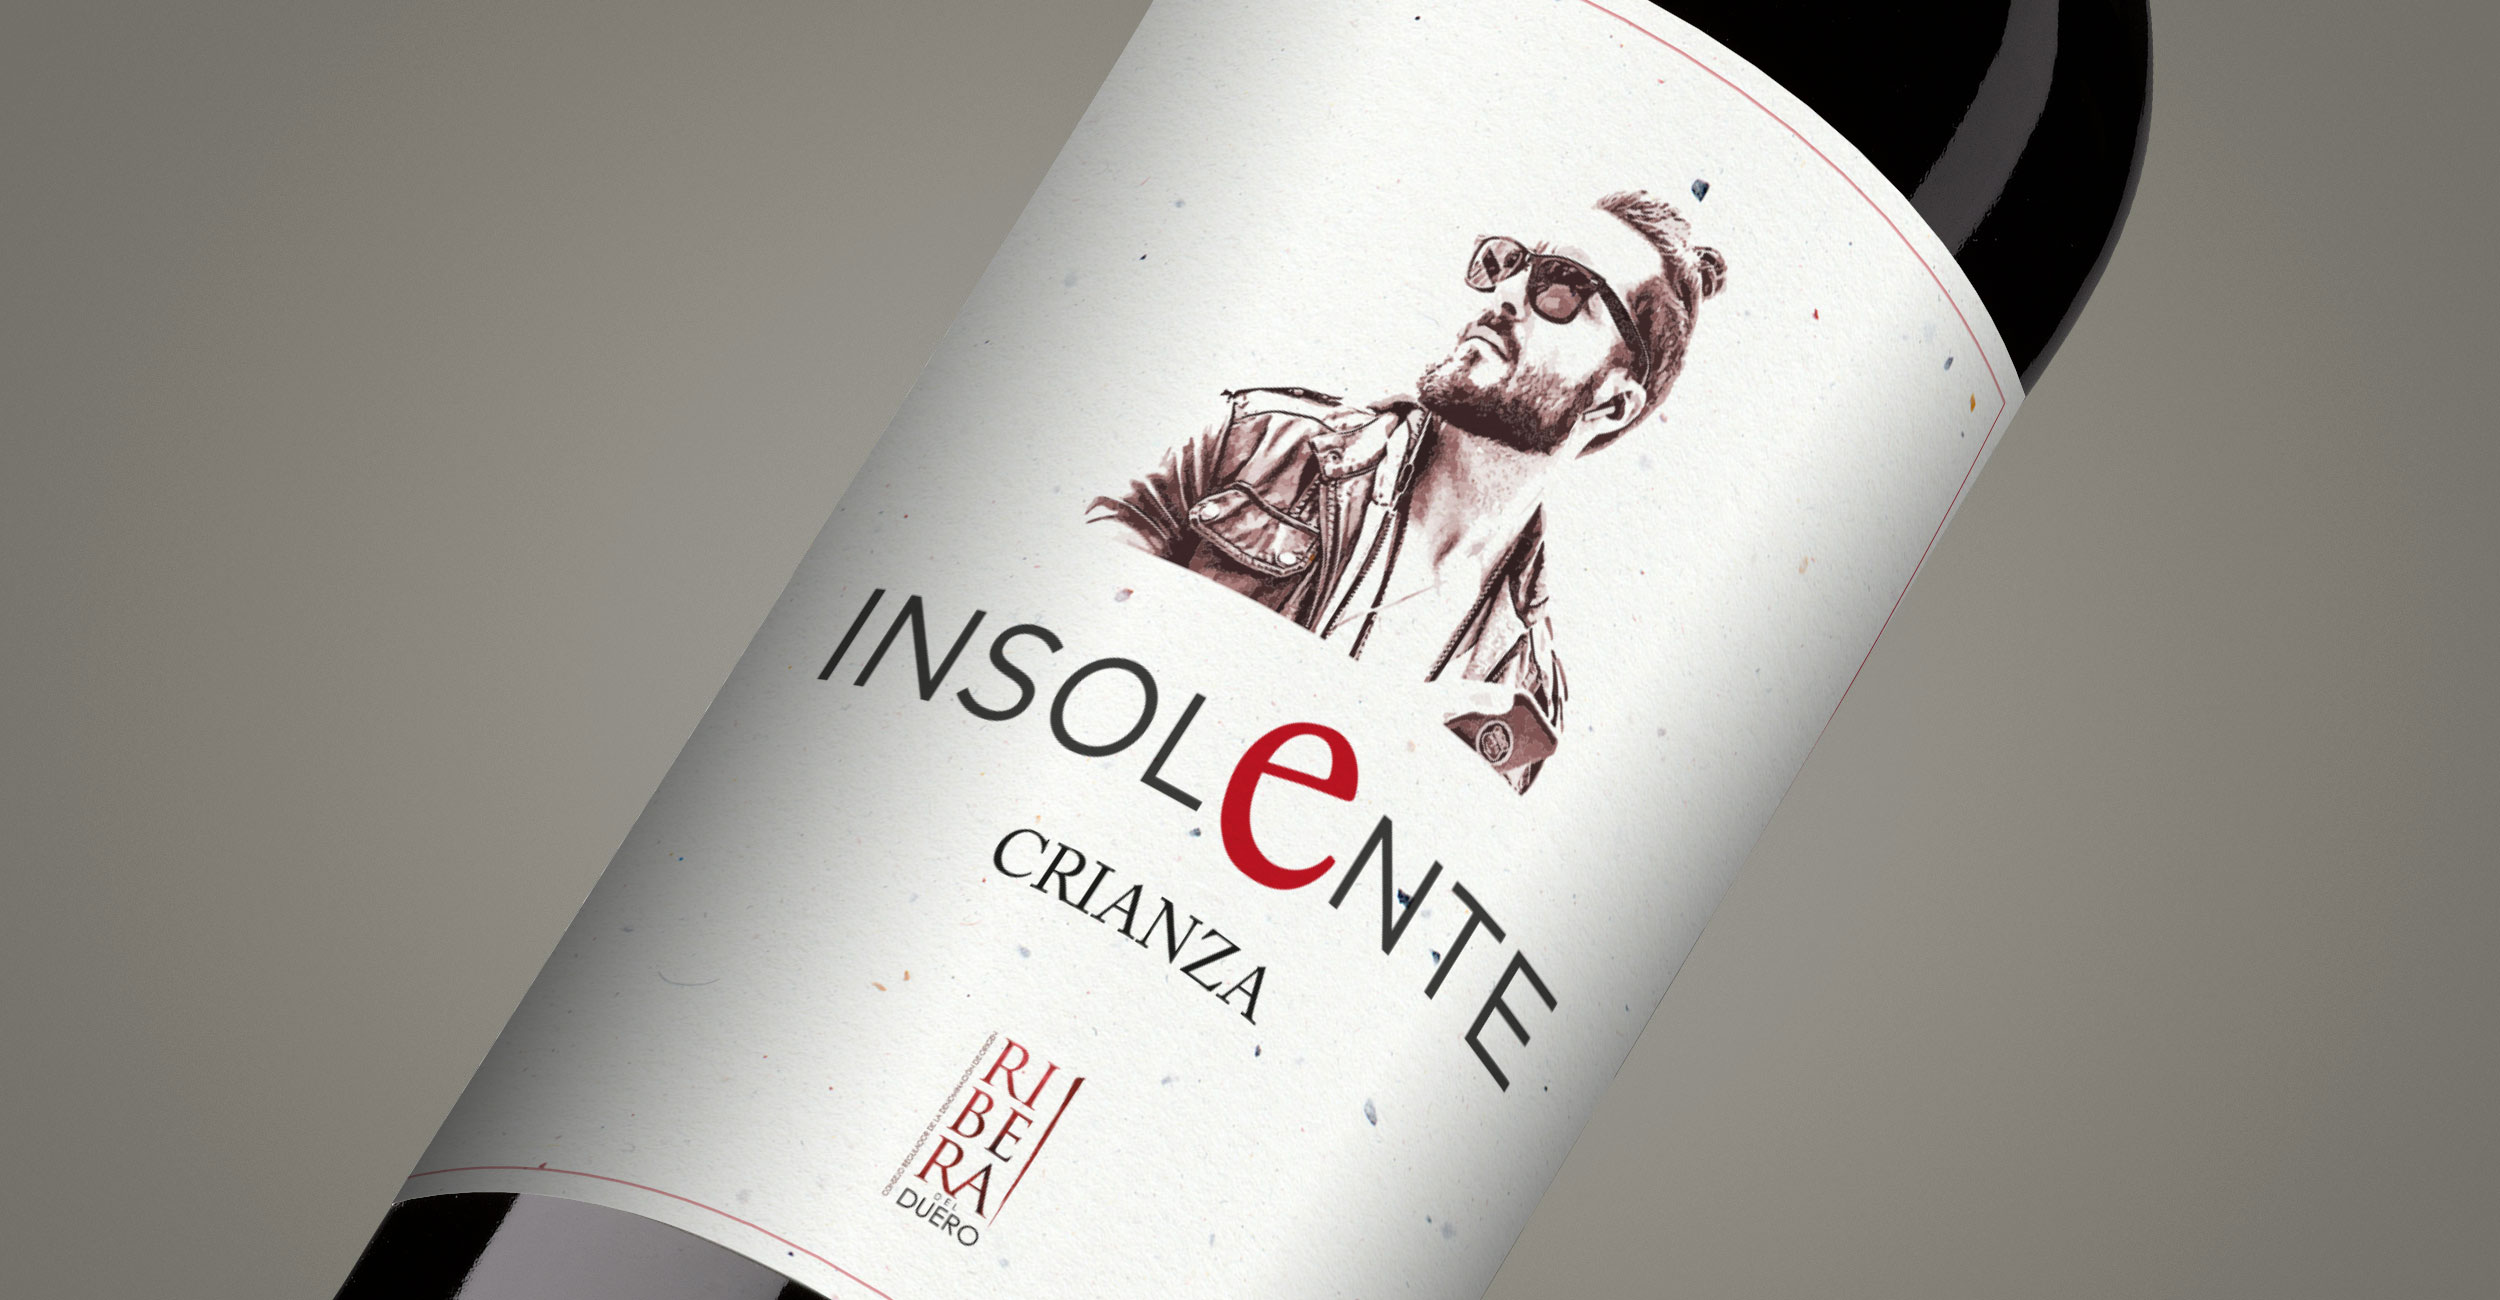 Graphic and creative design of wine labels and packaging for INSOLENTE